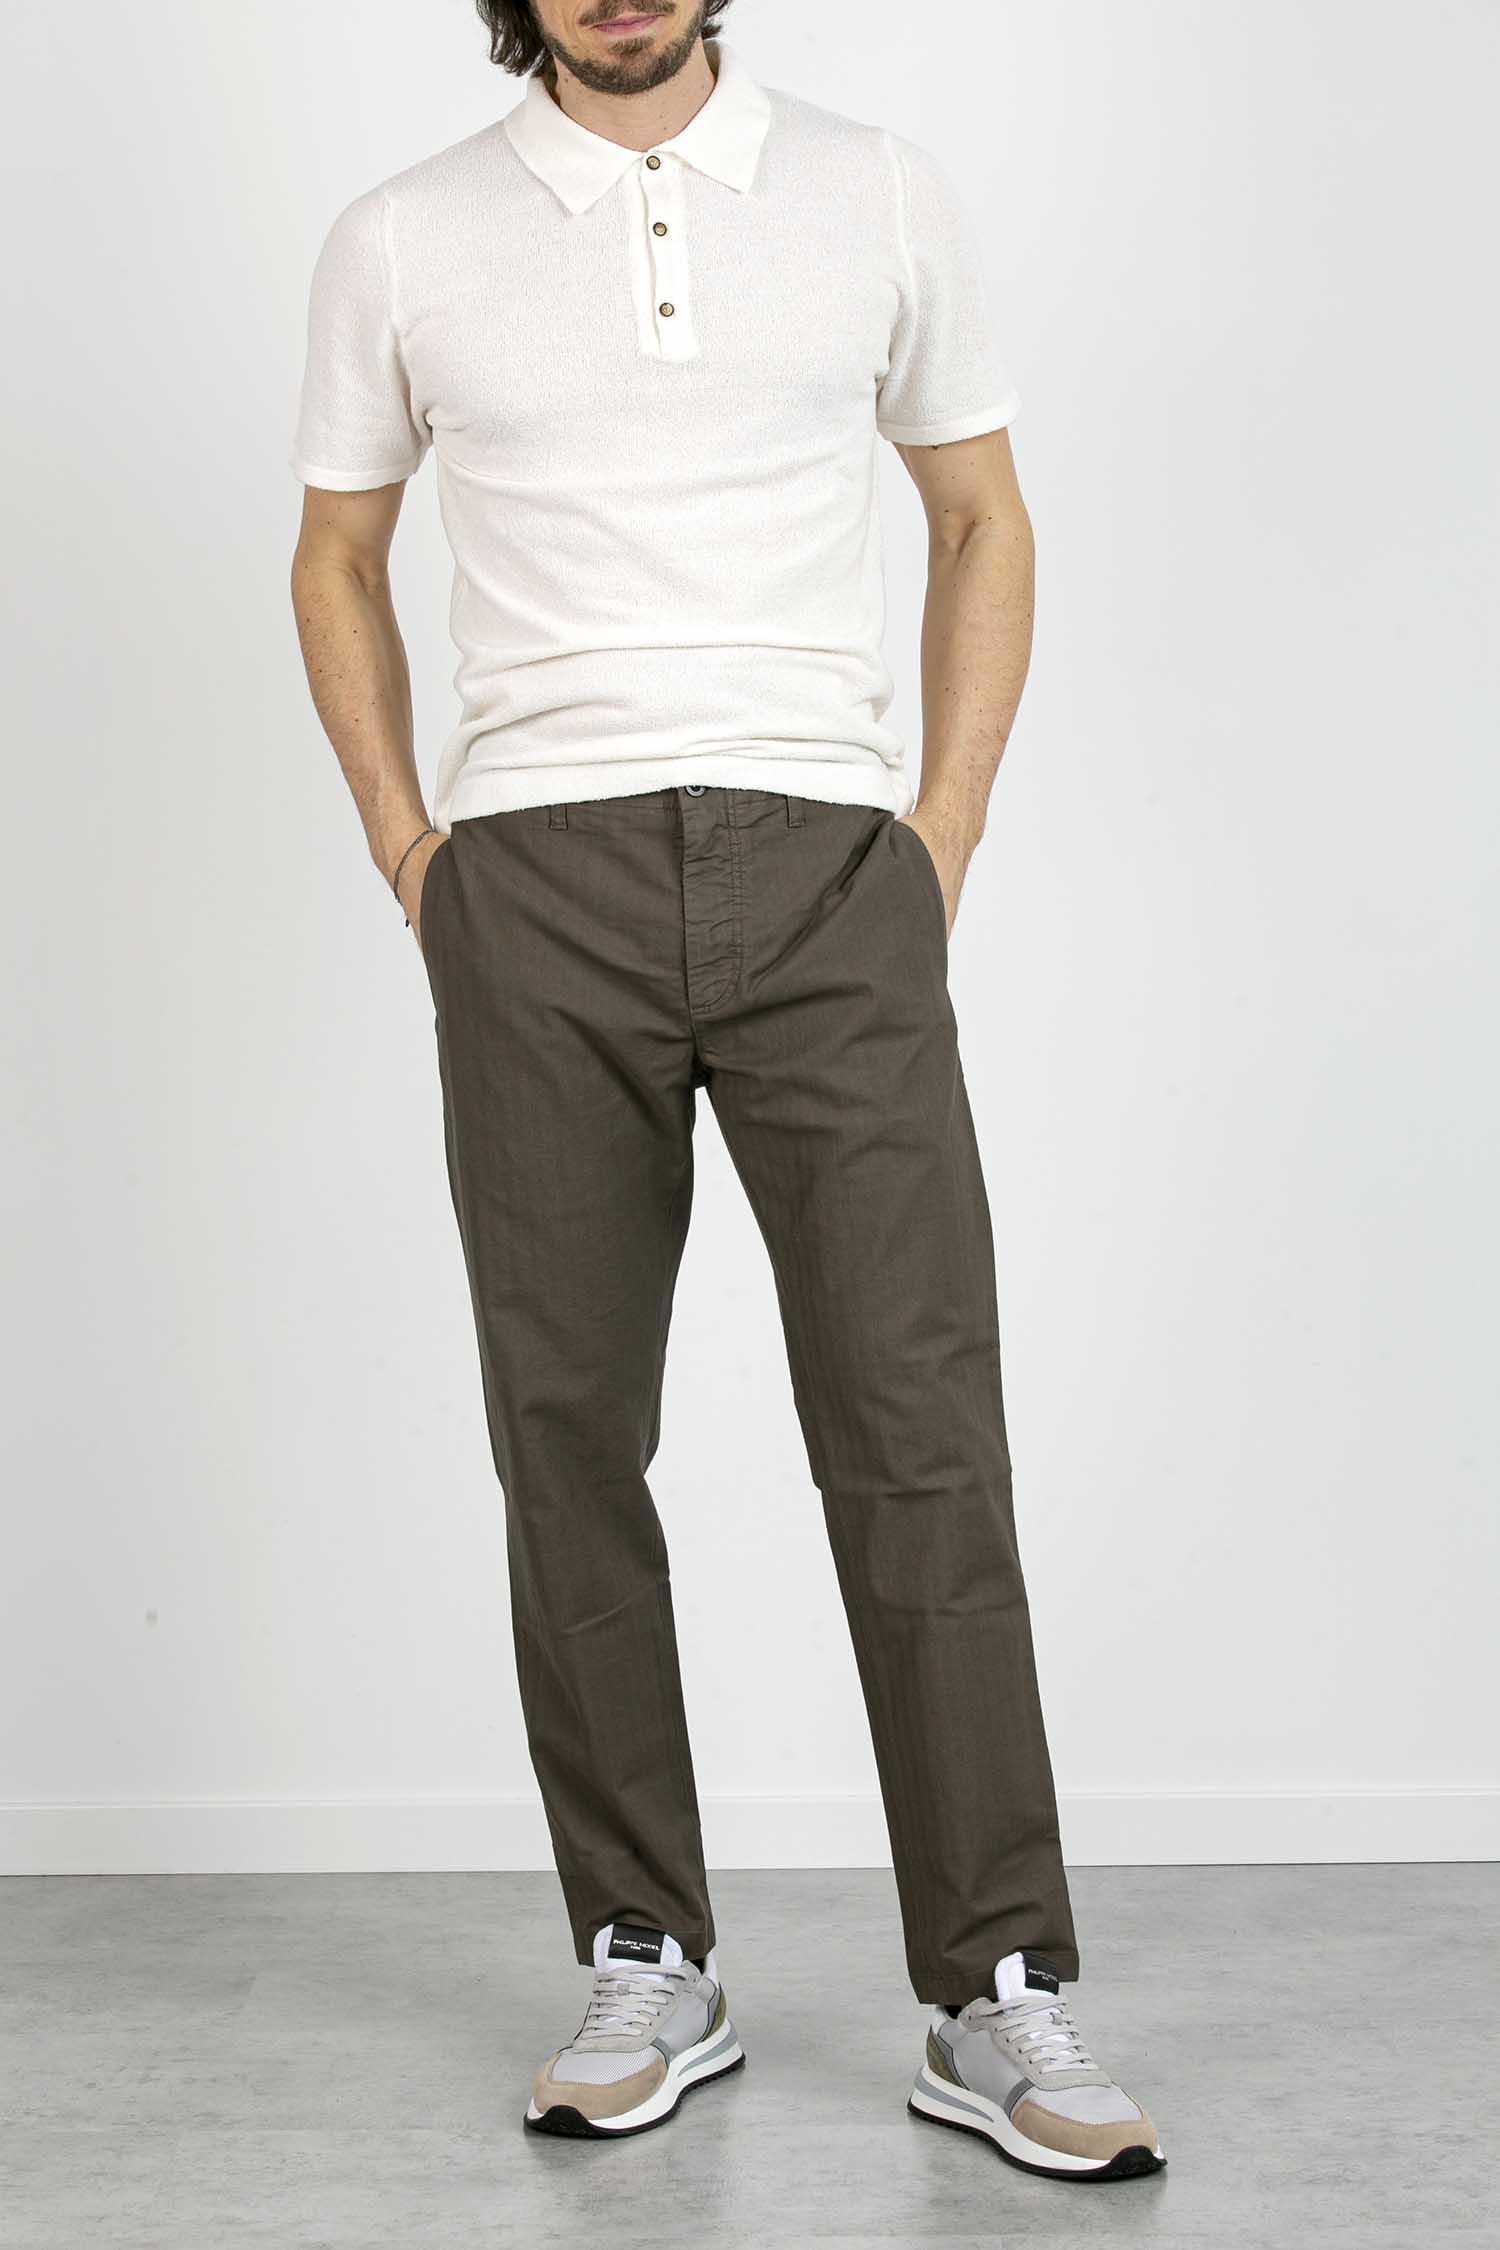 DEPARTMENT FIVE-OFF PANTALONE CHINOS CLASSIC-DFUP0071TS0040 GLACE